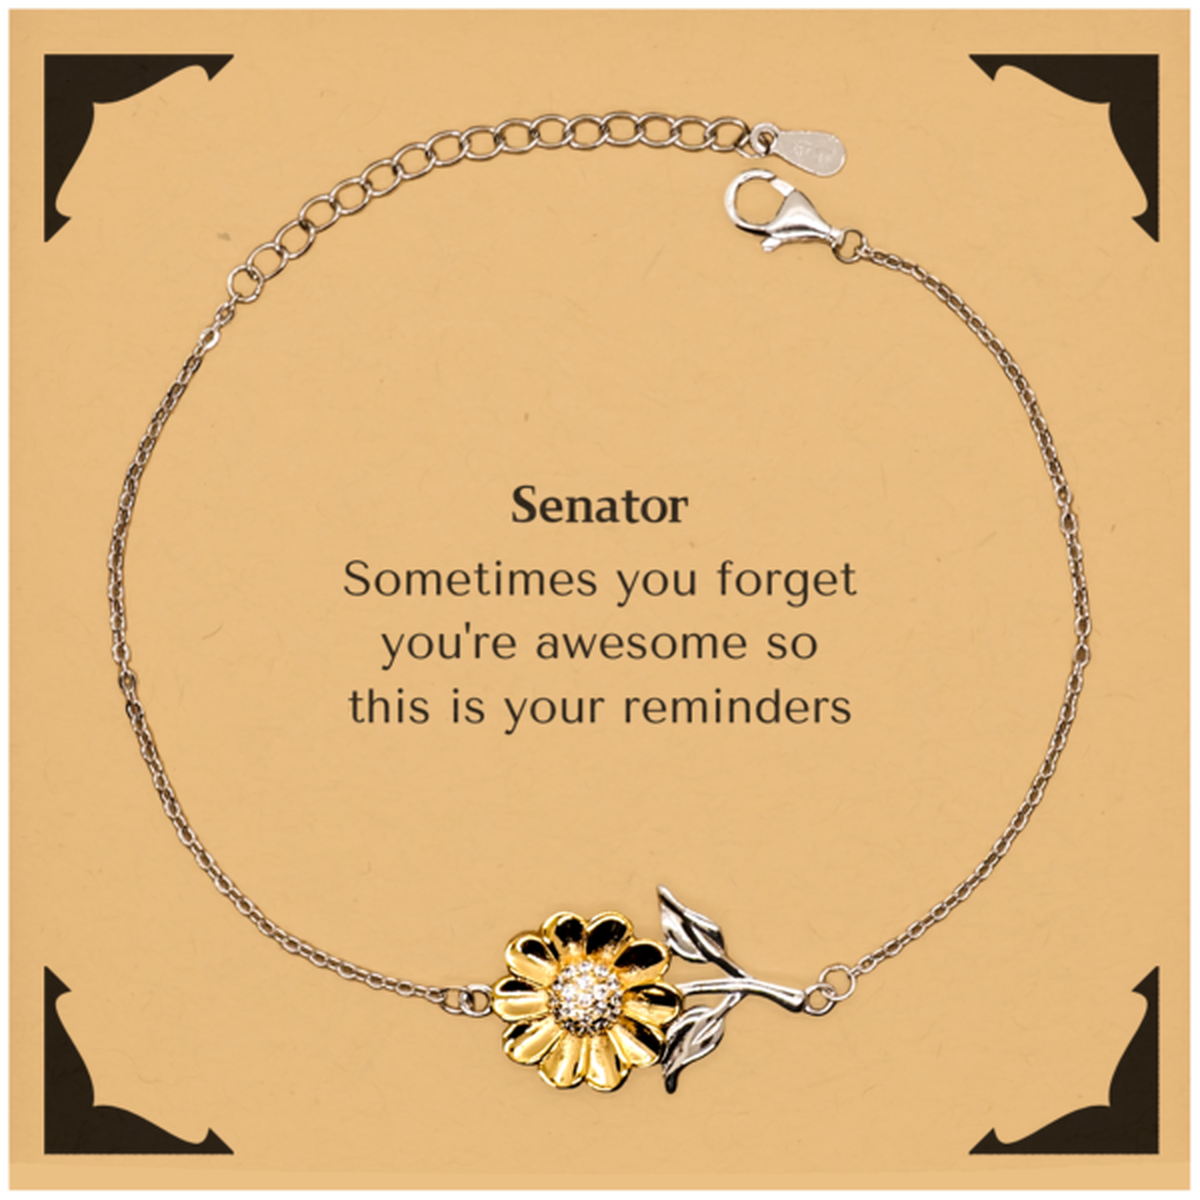 Sentimental Senator Sunflower Bracelet, Senator Sometimes you forget you're awesome so this is your reminders, Graduation Christmas Birthday Gifts for Senator, Men, Women, Coworkers